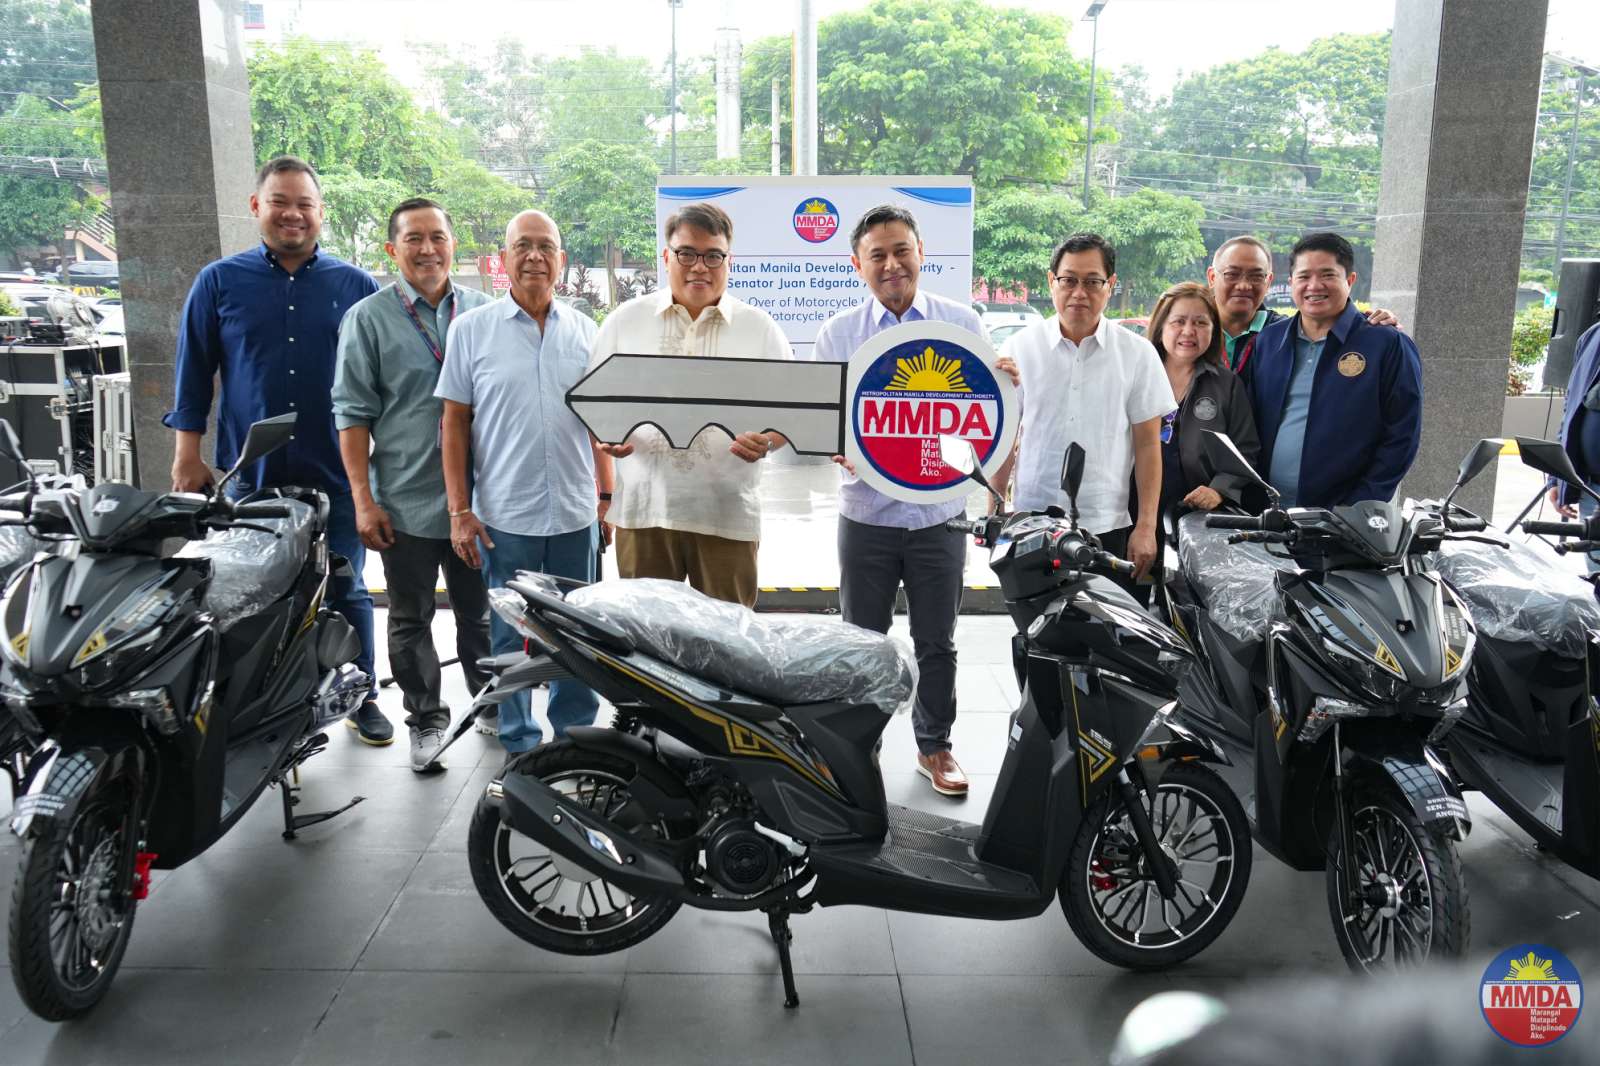 MMDA Motorcycle Riding Academy - soon to launch this 27 September